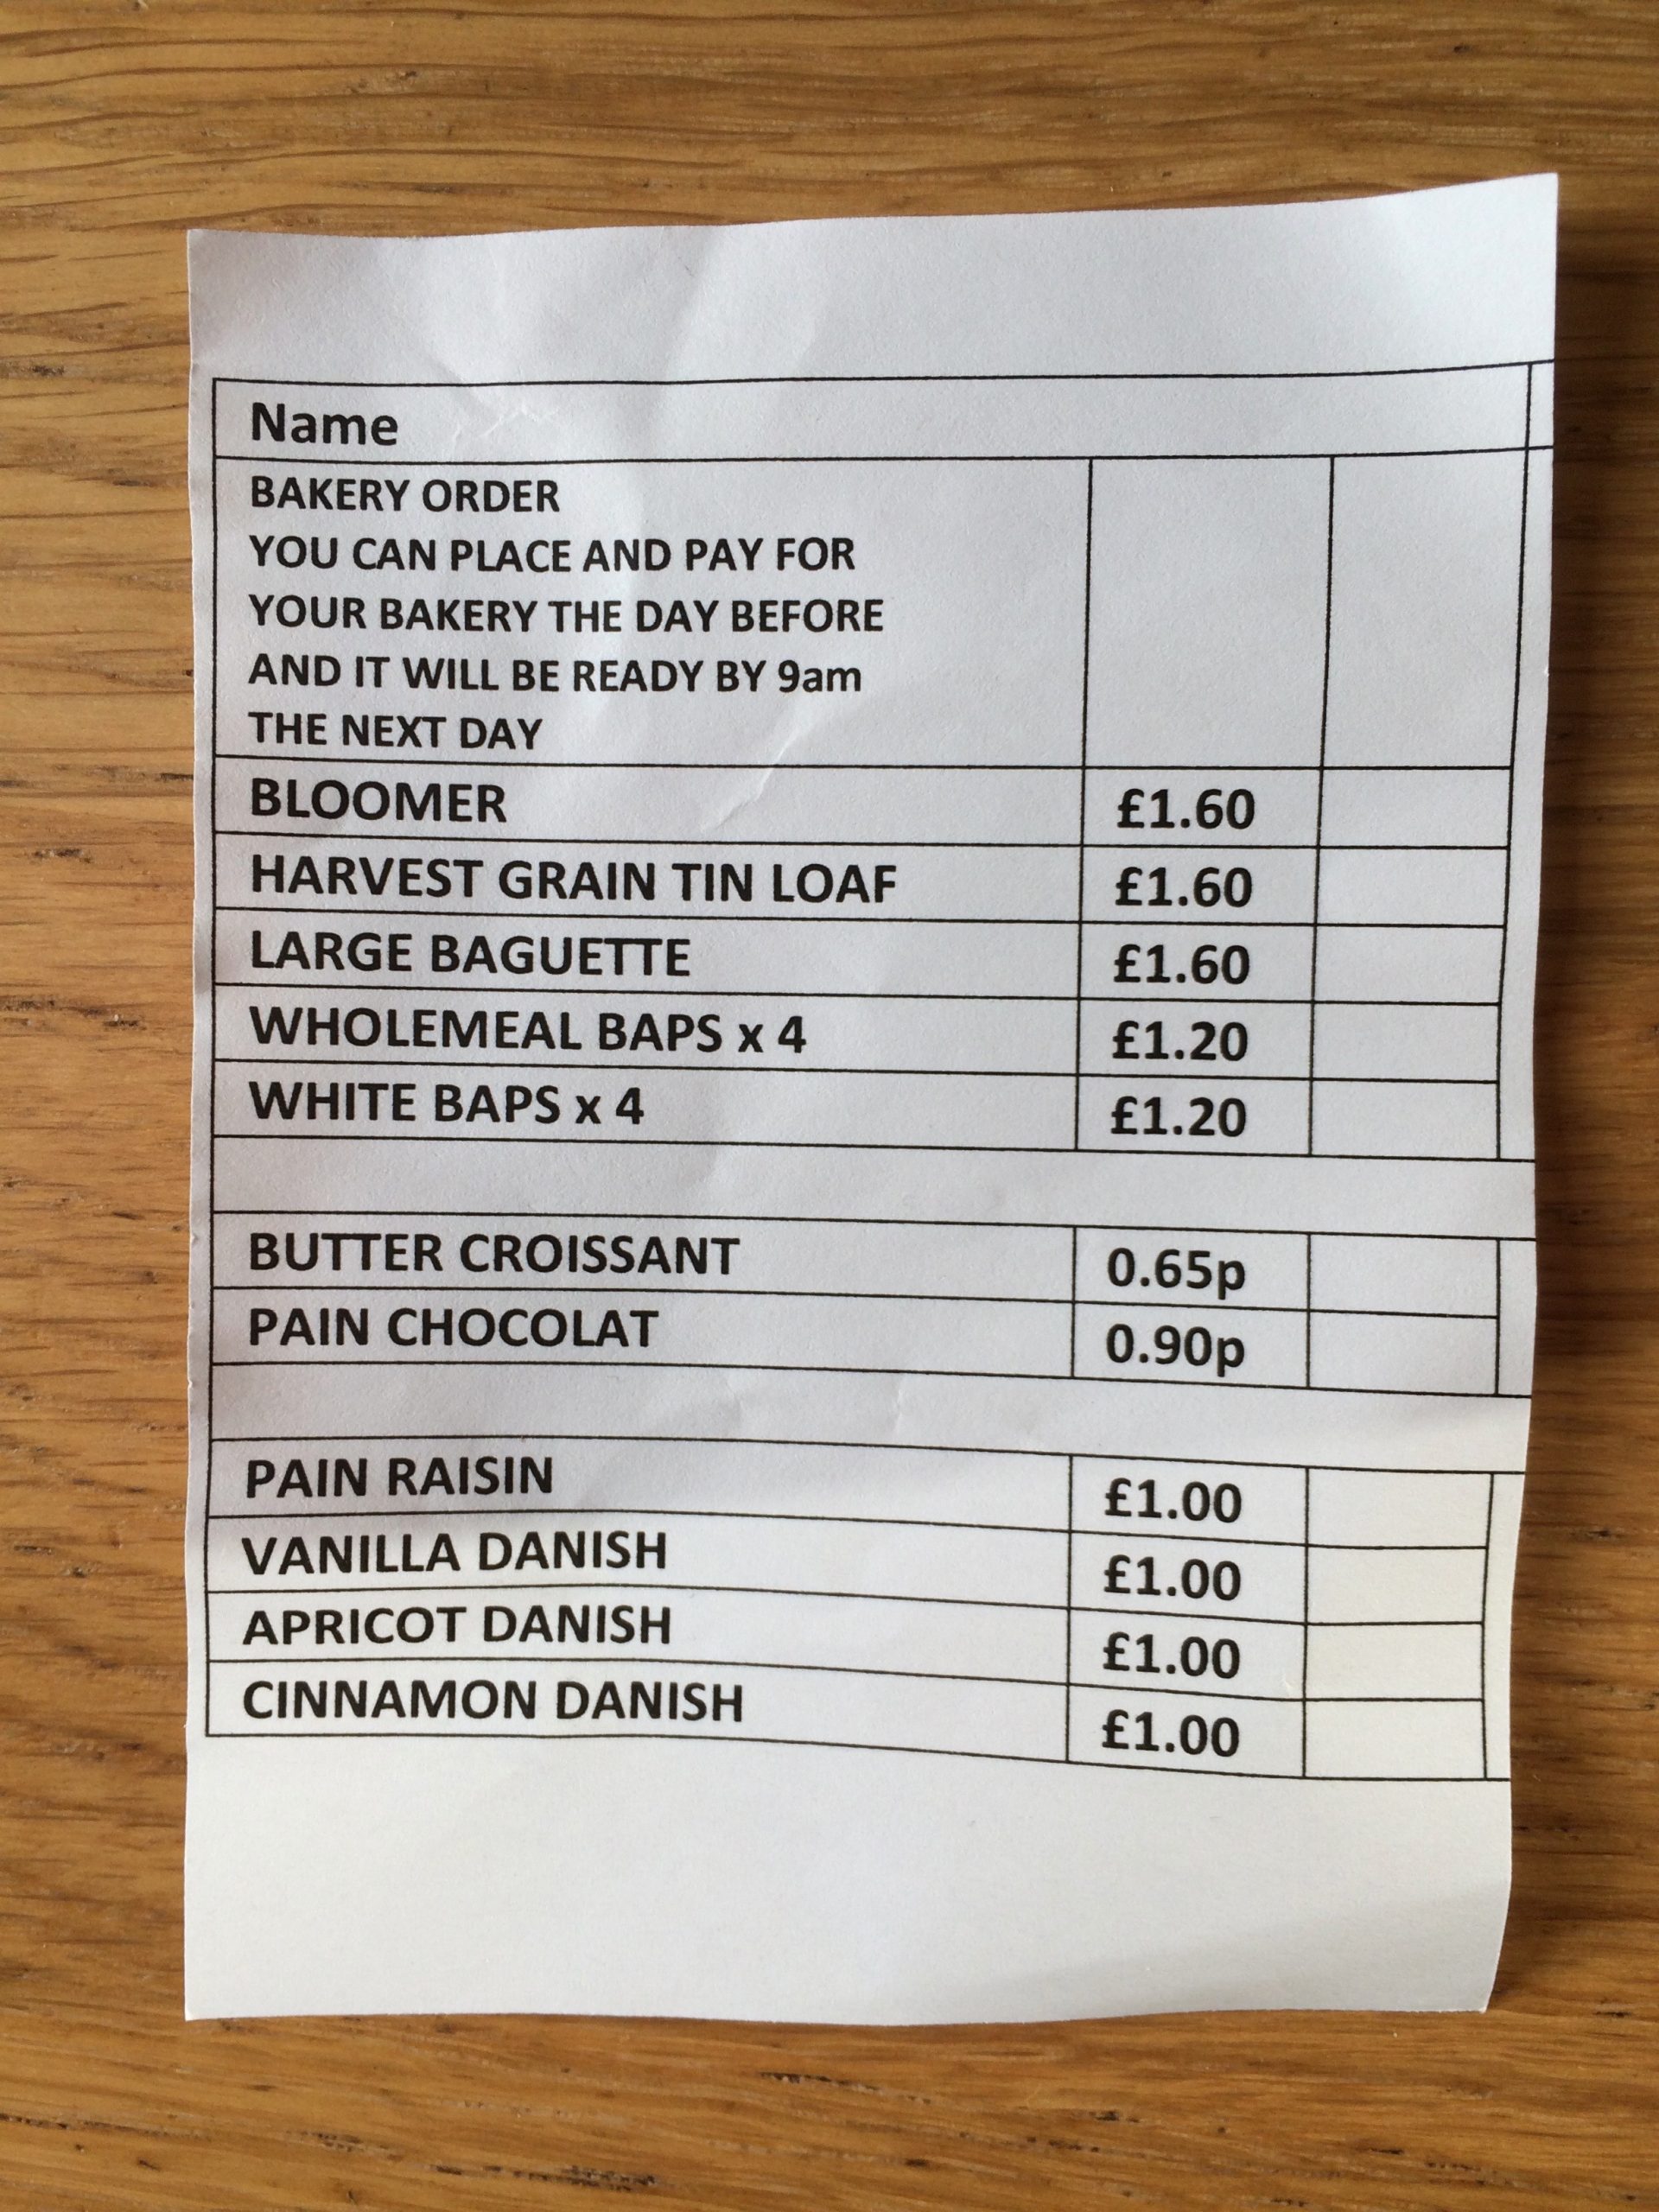 Items to order at the on-site bakery